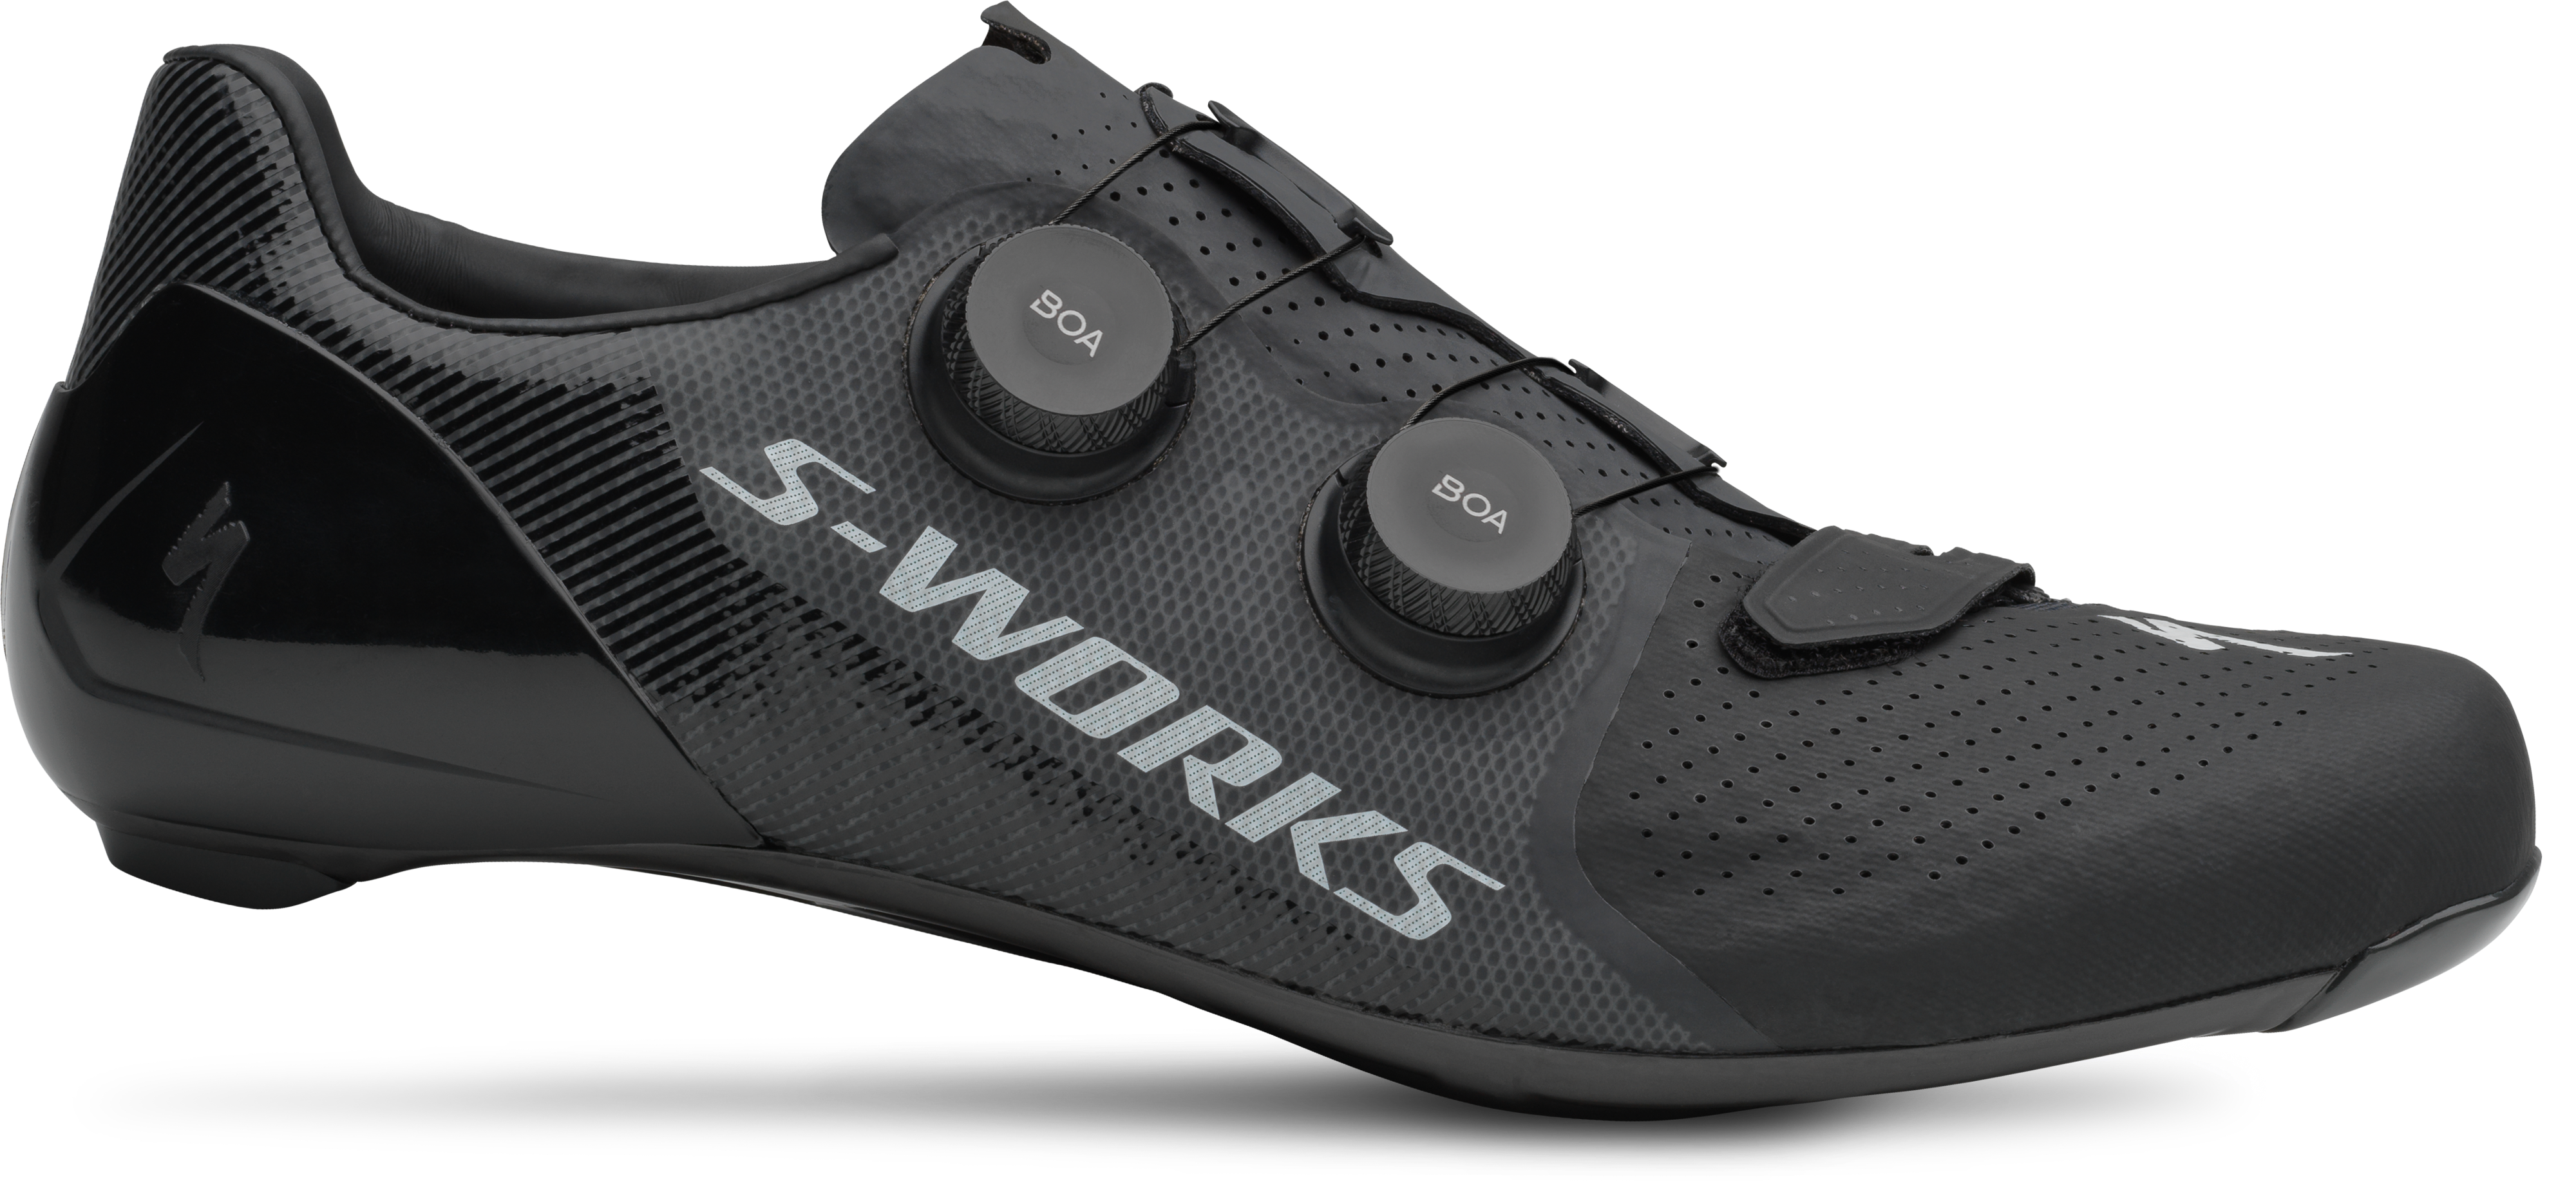 7 Road Shoes Specialized.com